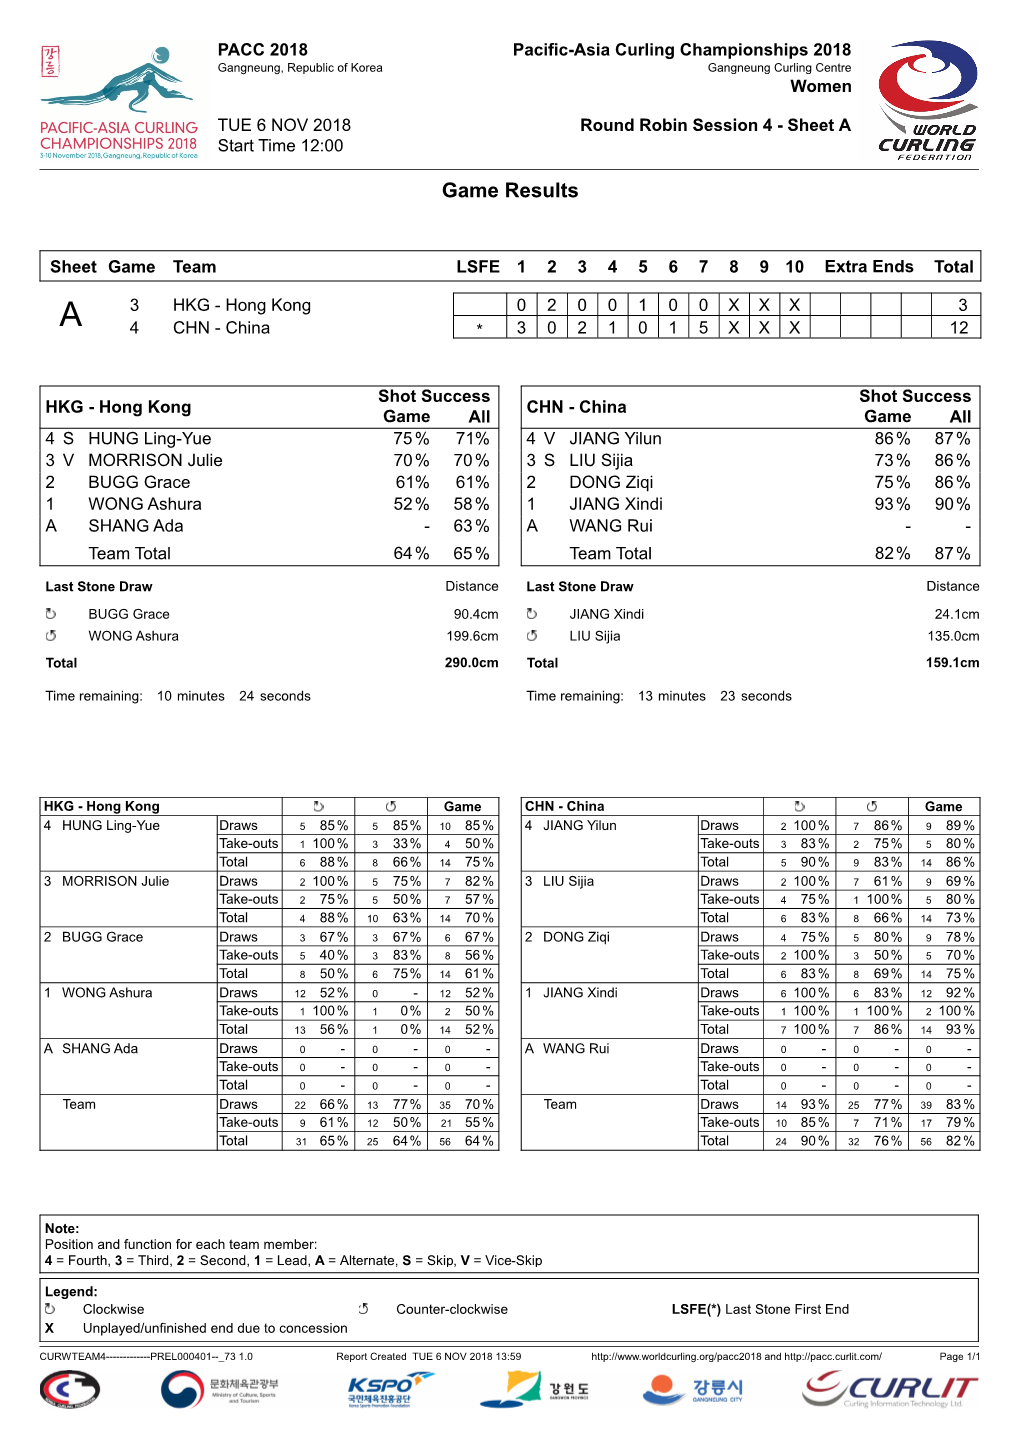 Game Results HKG-CHN